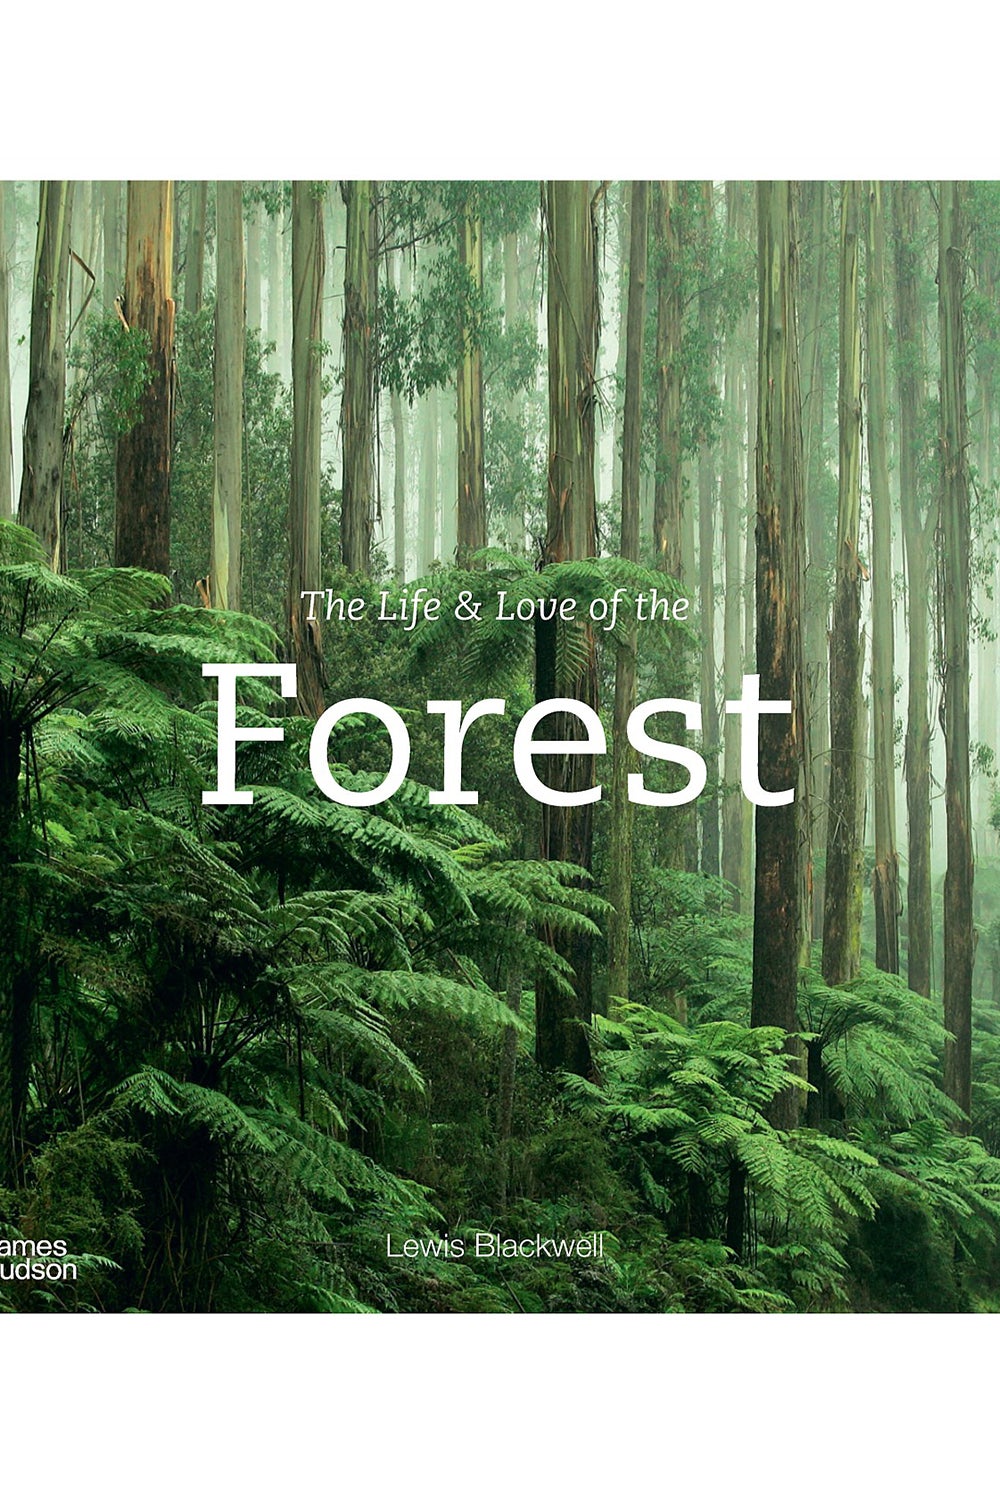 The Life and Love of the Forest by Lewis Blackwell